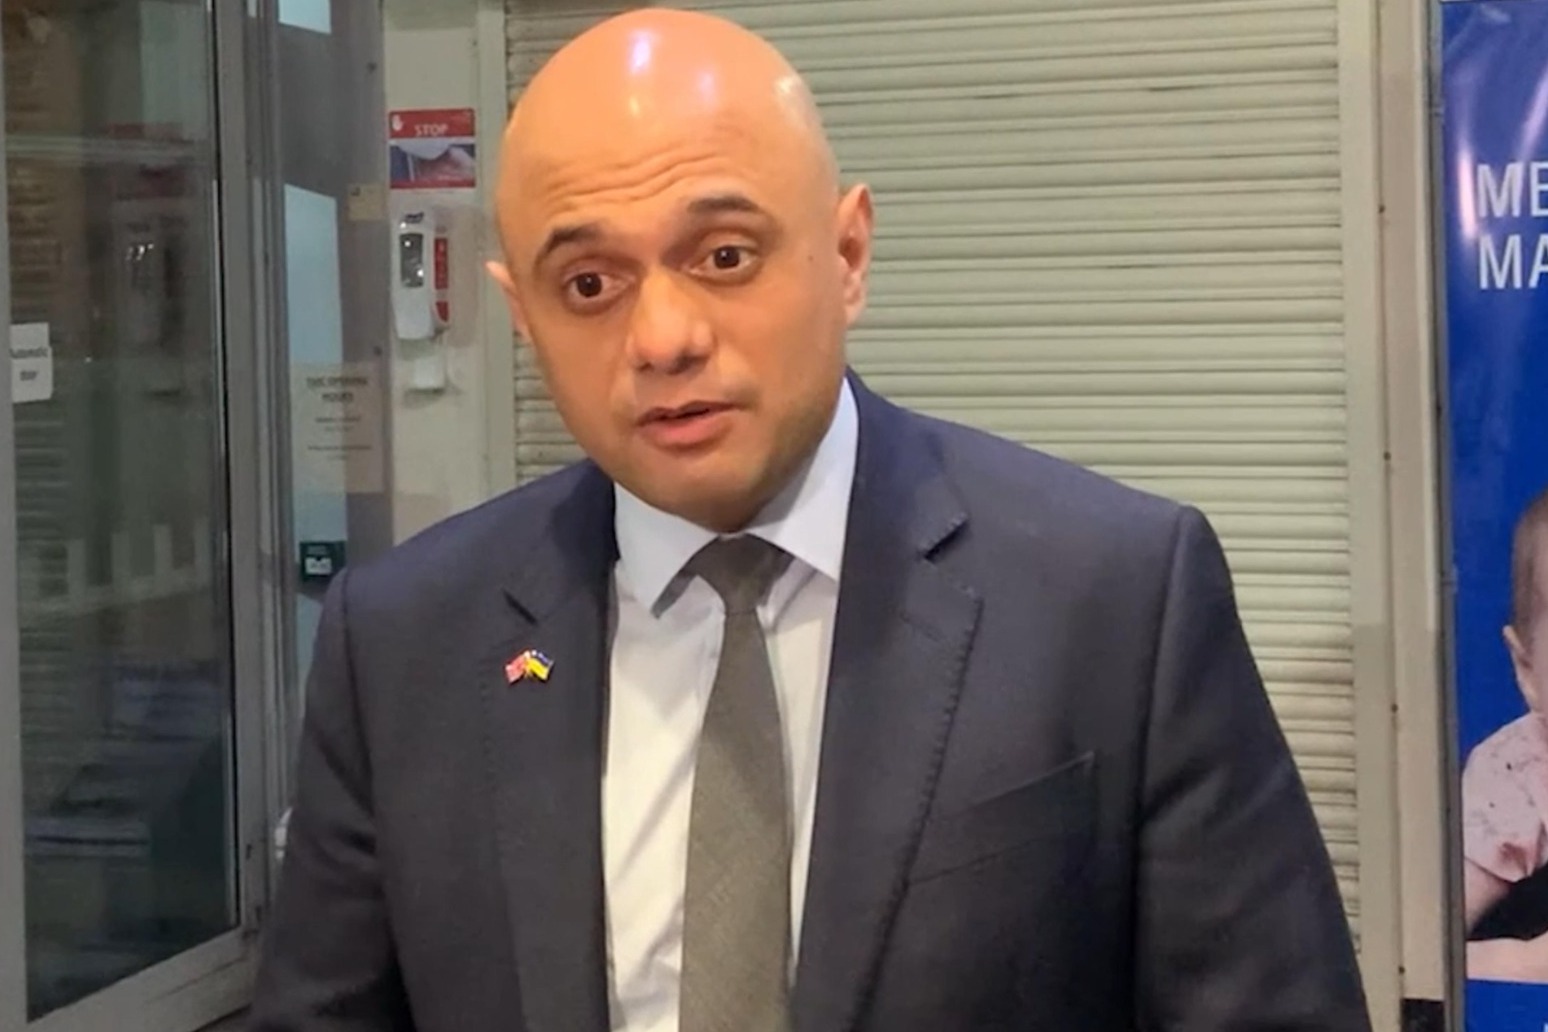 Rollout of fourth dose of Covid 19 vaccine being kept under review Javid says